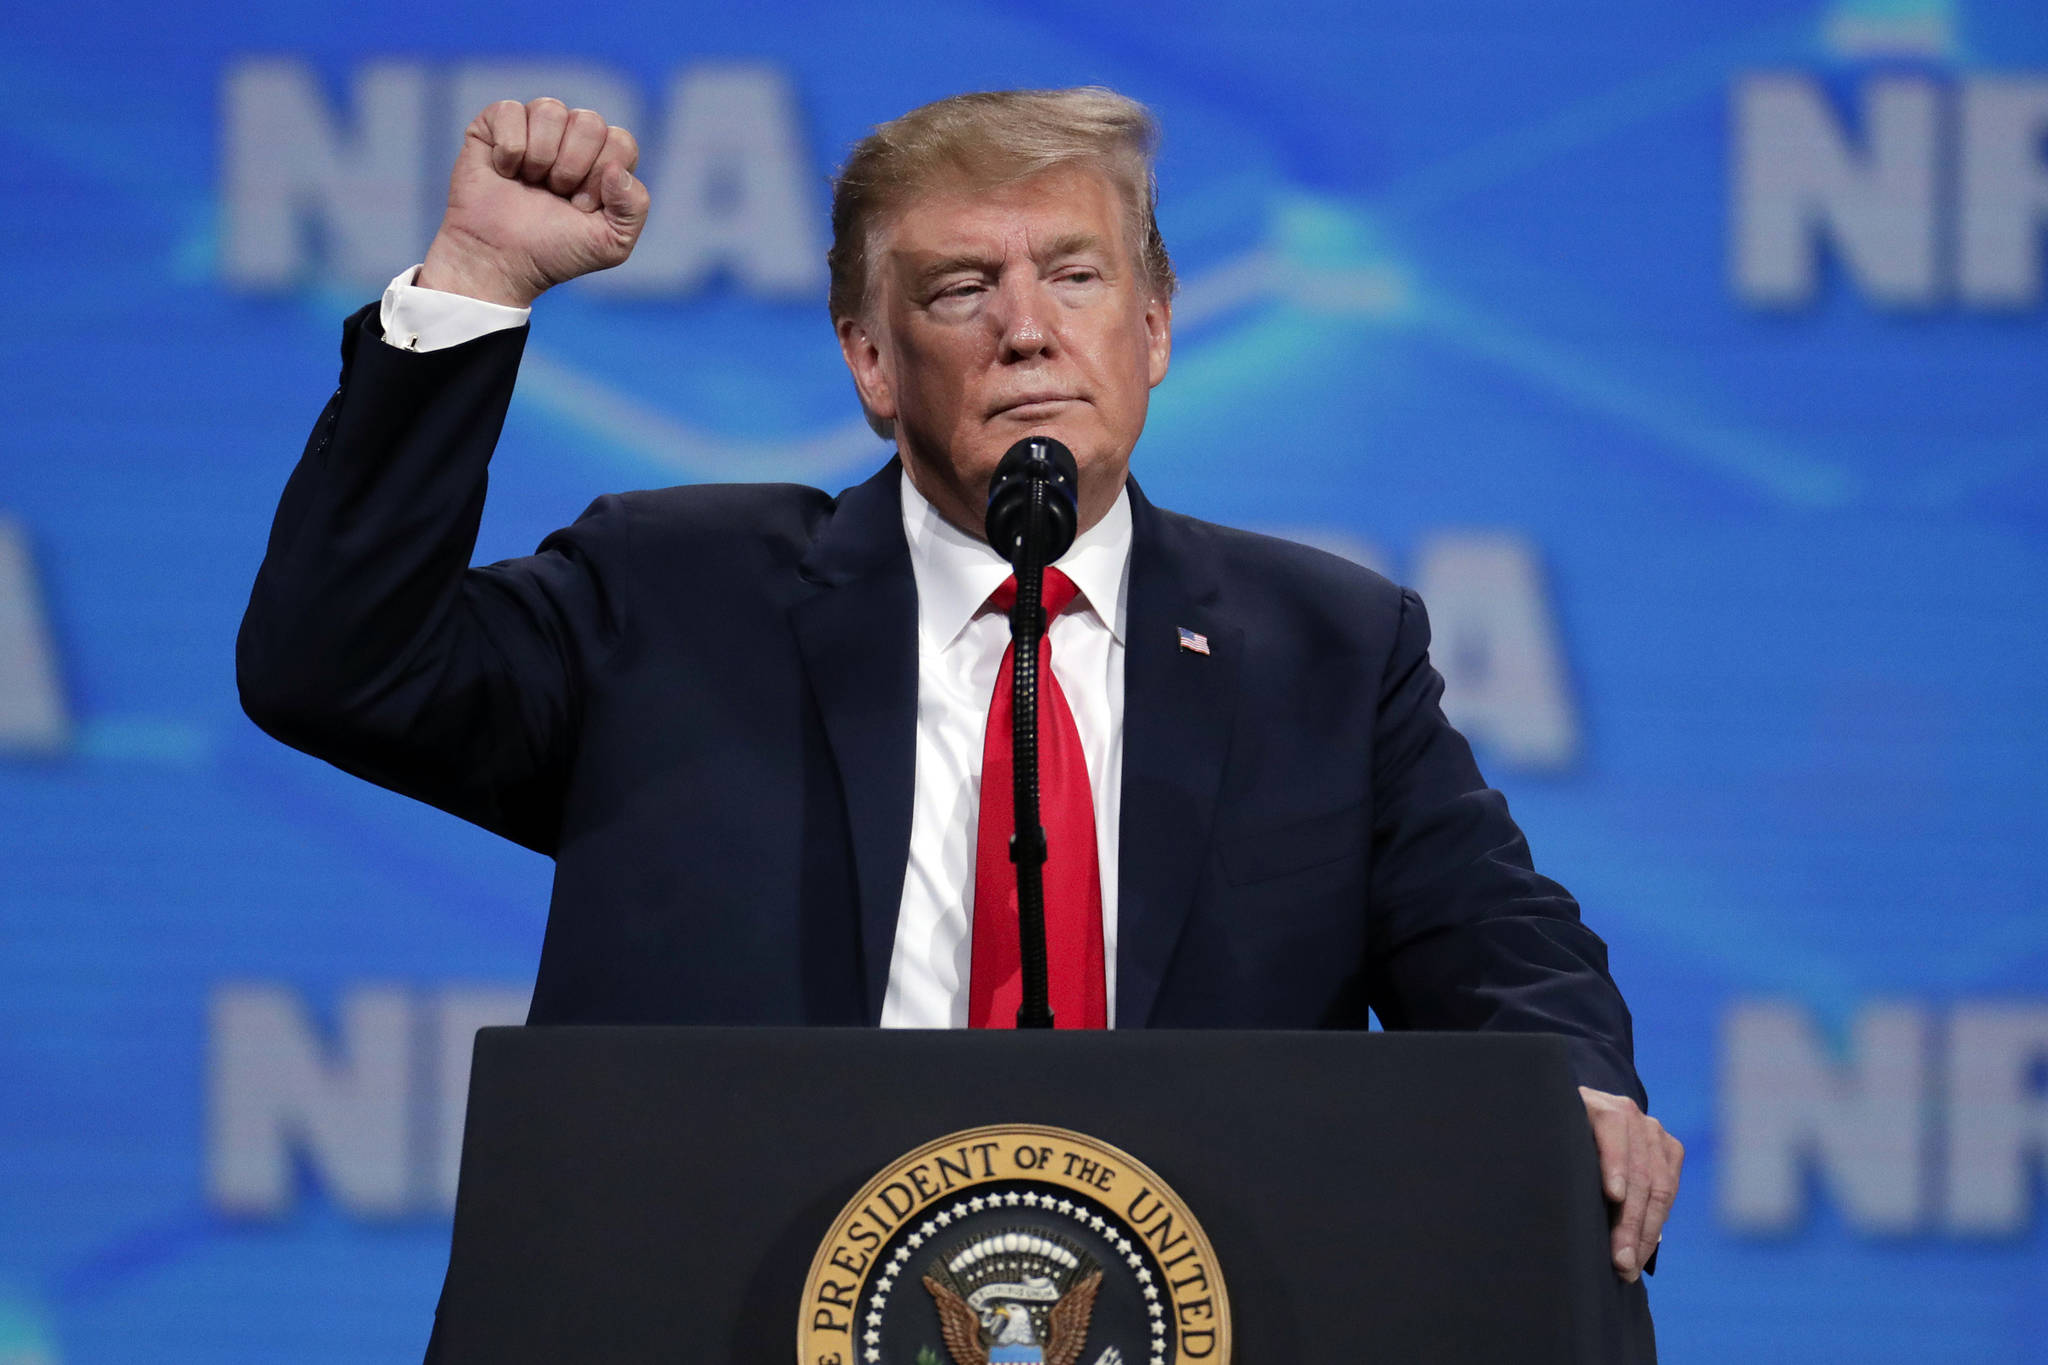 President Donald Trump speaks at the National Rifle Association Institute for Legislative Action Leadership Forum in Lucas Oil Stadium in Indianapolis on Friday, April 26, 2019. (Michael Conroy | Associated Press)